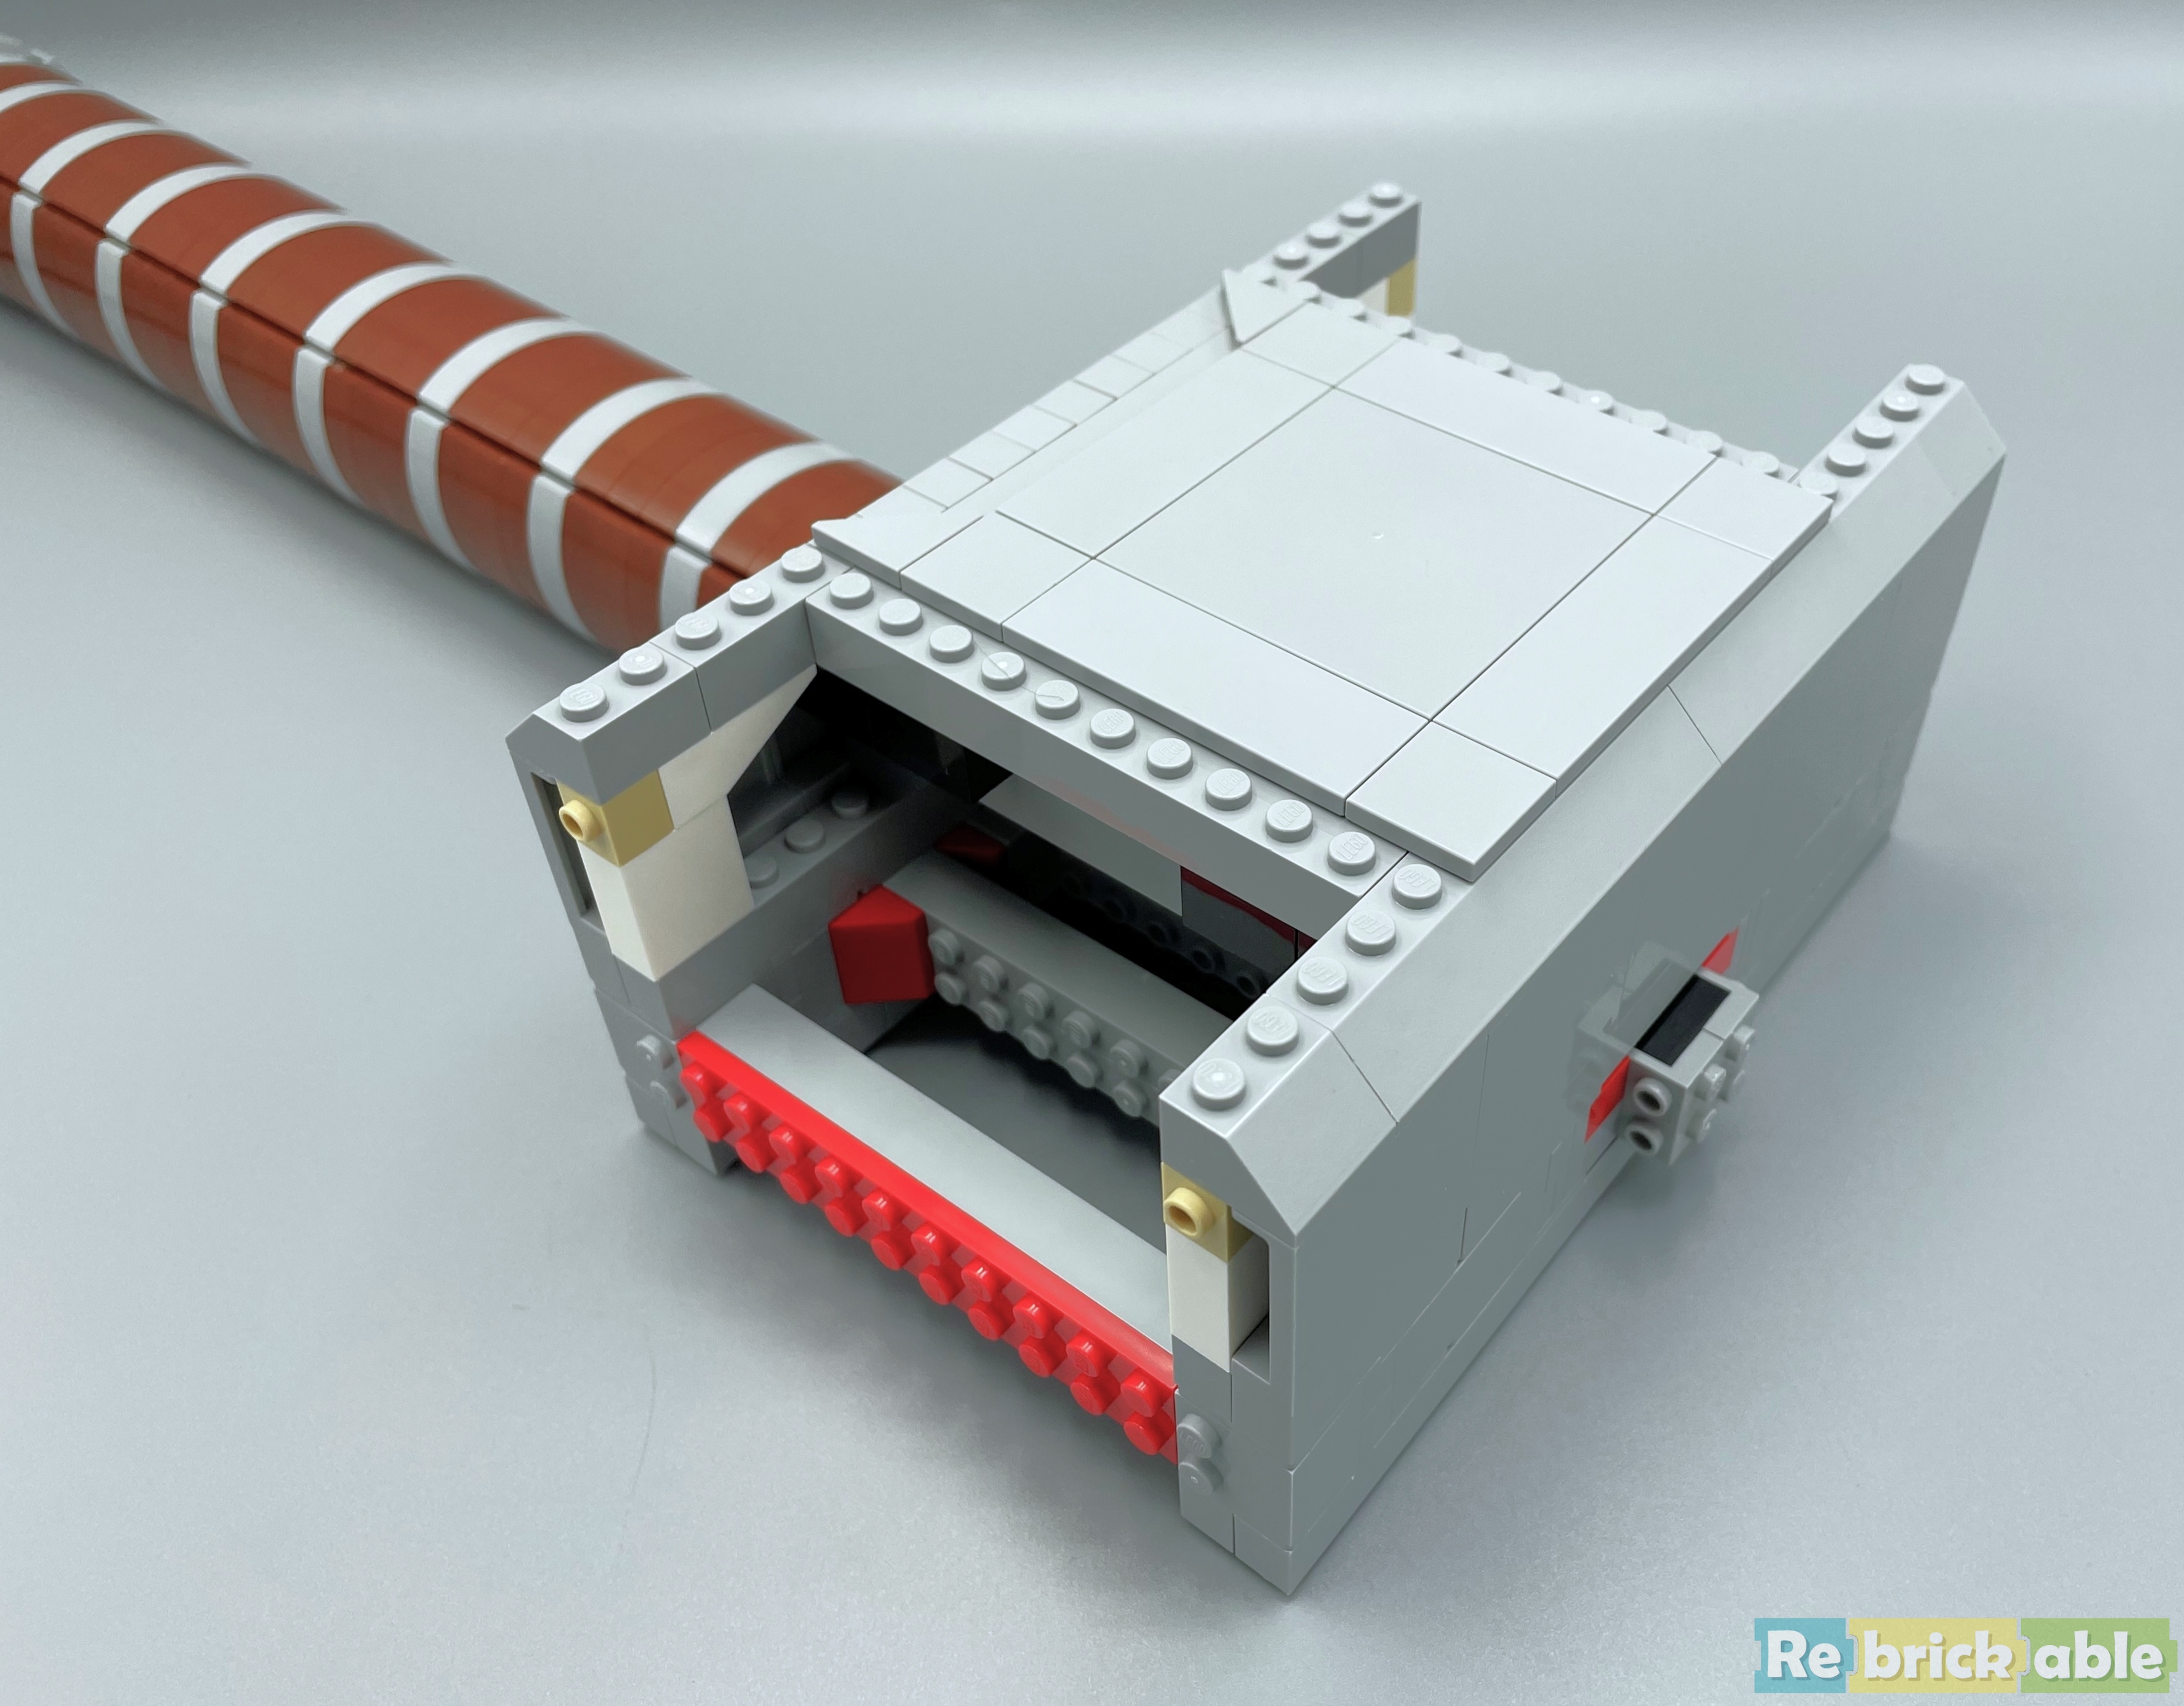 Thor's Iconic Hammer Is Now a Life-Size LEGO Set